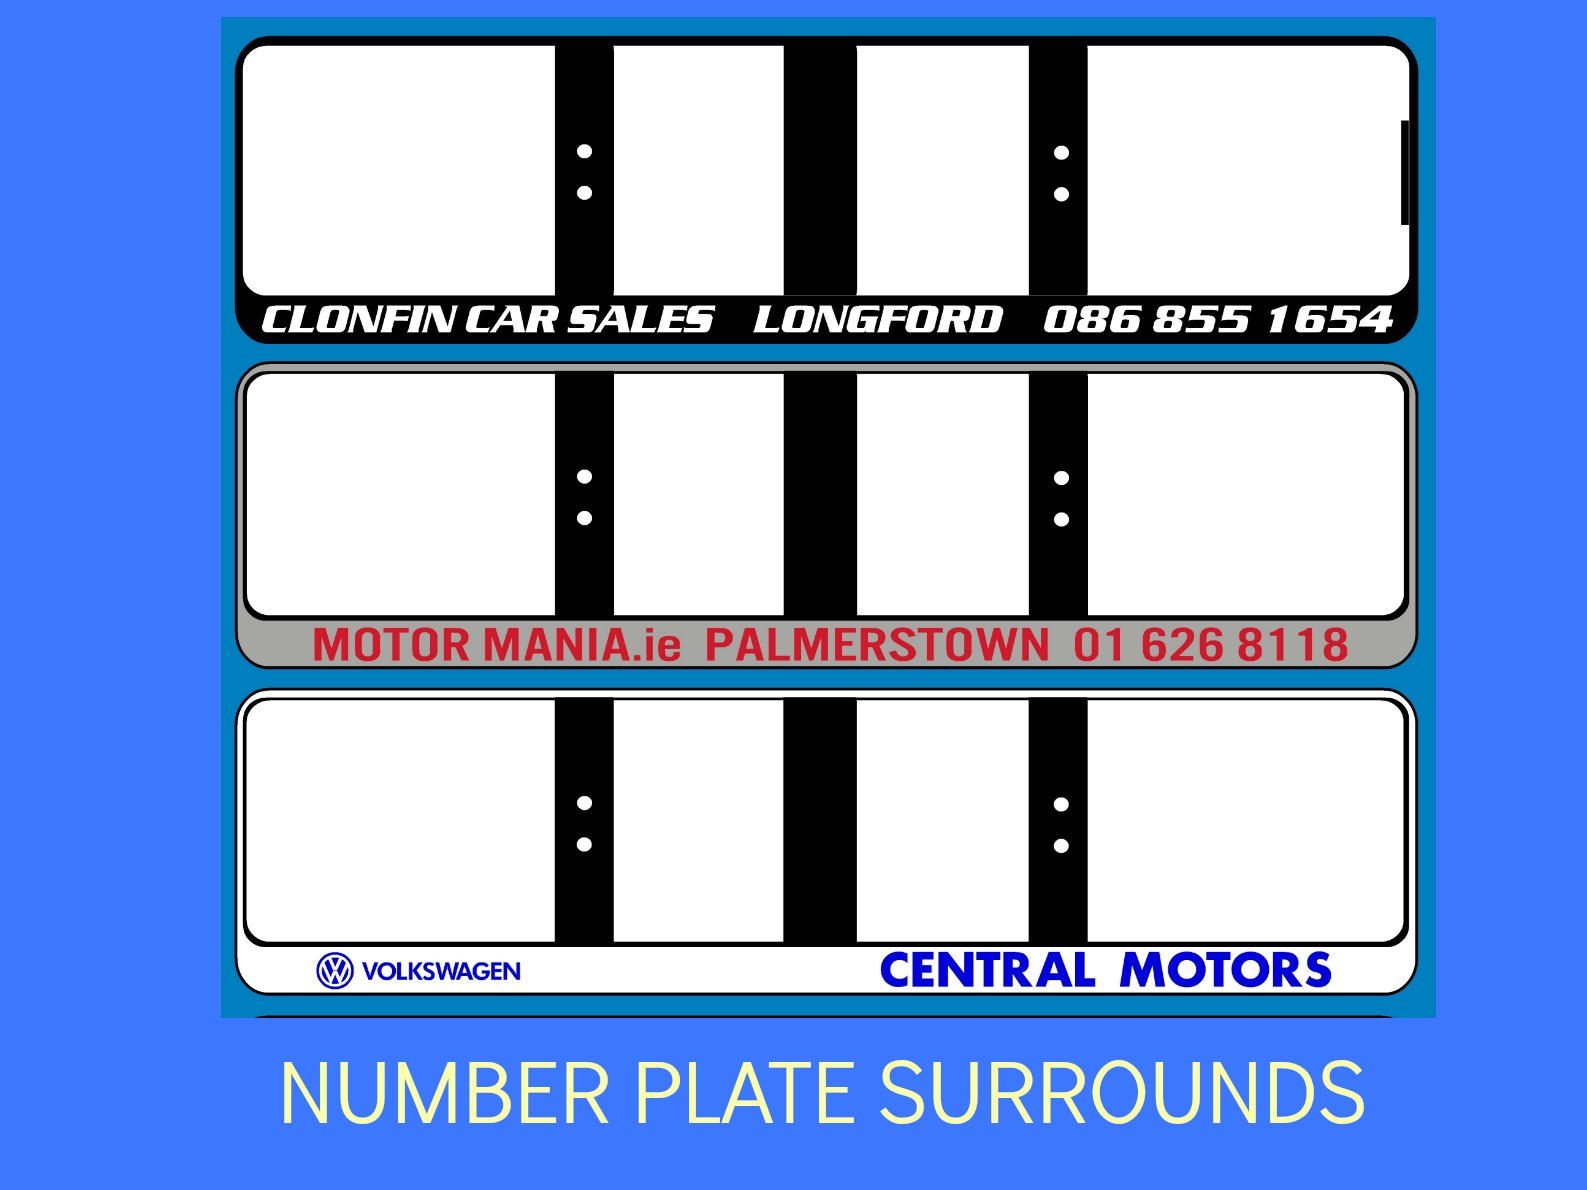 REG SURROUNDS, NUMBER PLATE BACKINGS, LICENCE PLATE SURROUNDS